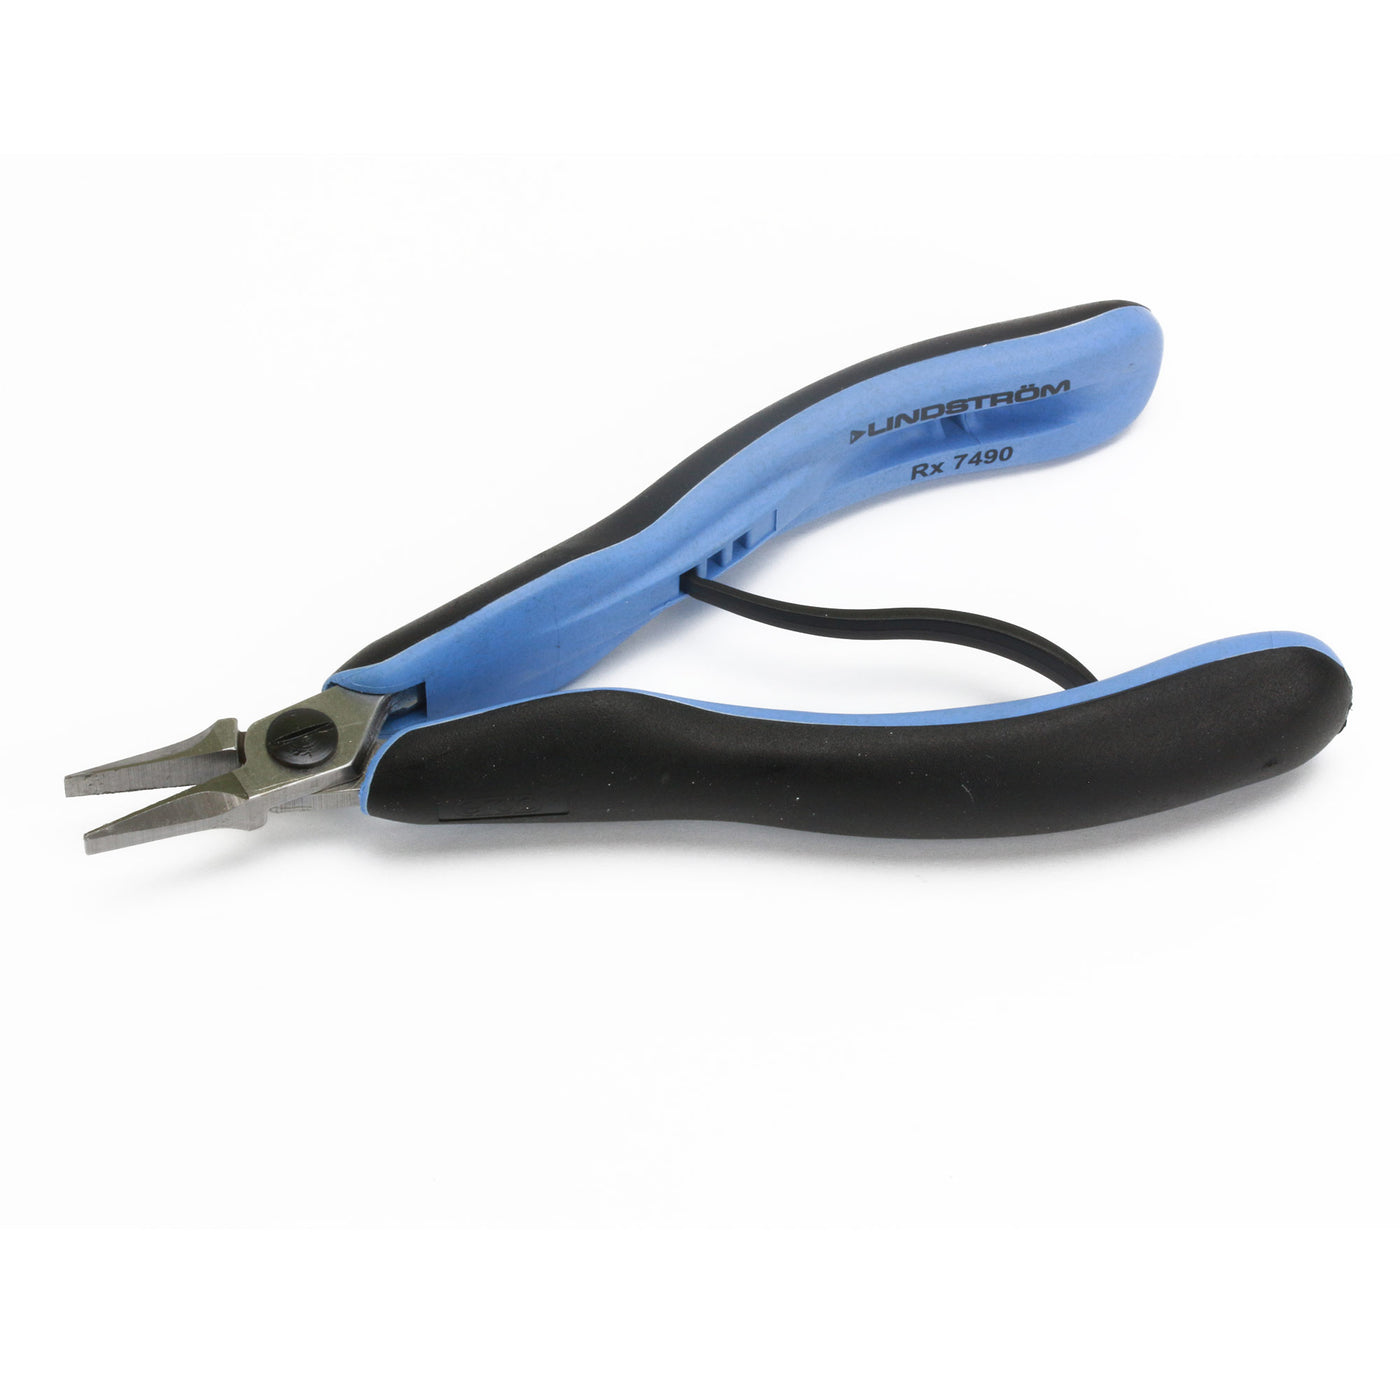 Flat Nose Stainless Steel Pliers Jewelry Making Supplies 